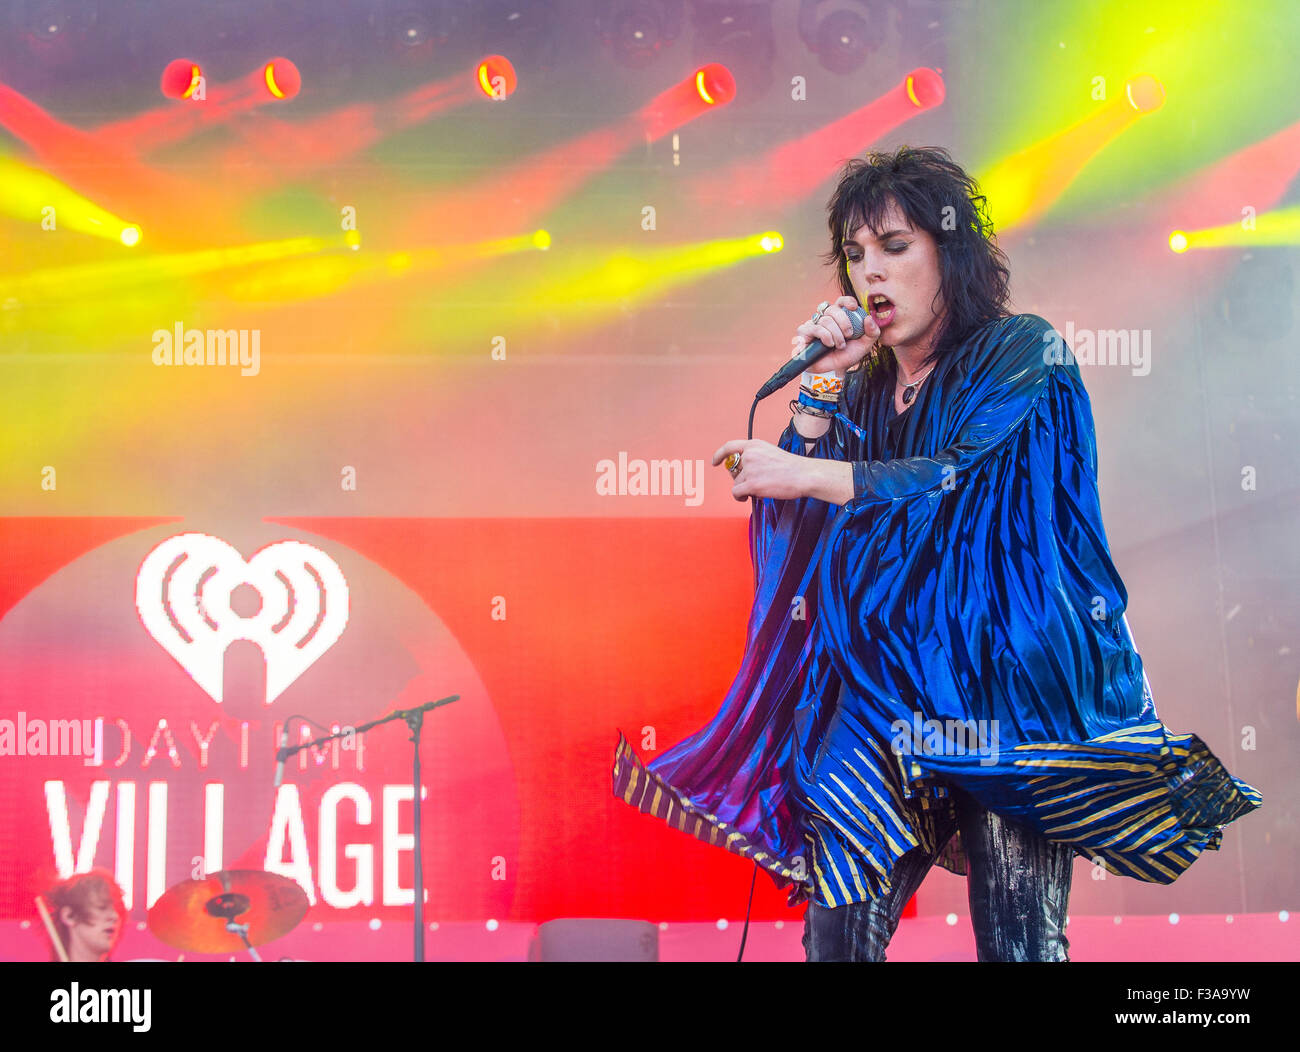 Singer Luke Spiller of The Struts performs onstage at the 2015 iHeartRadio Music Festival in Las Vegas Stock Photo